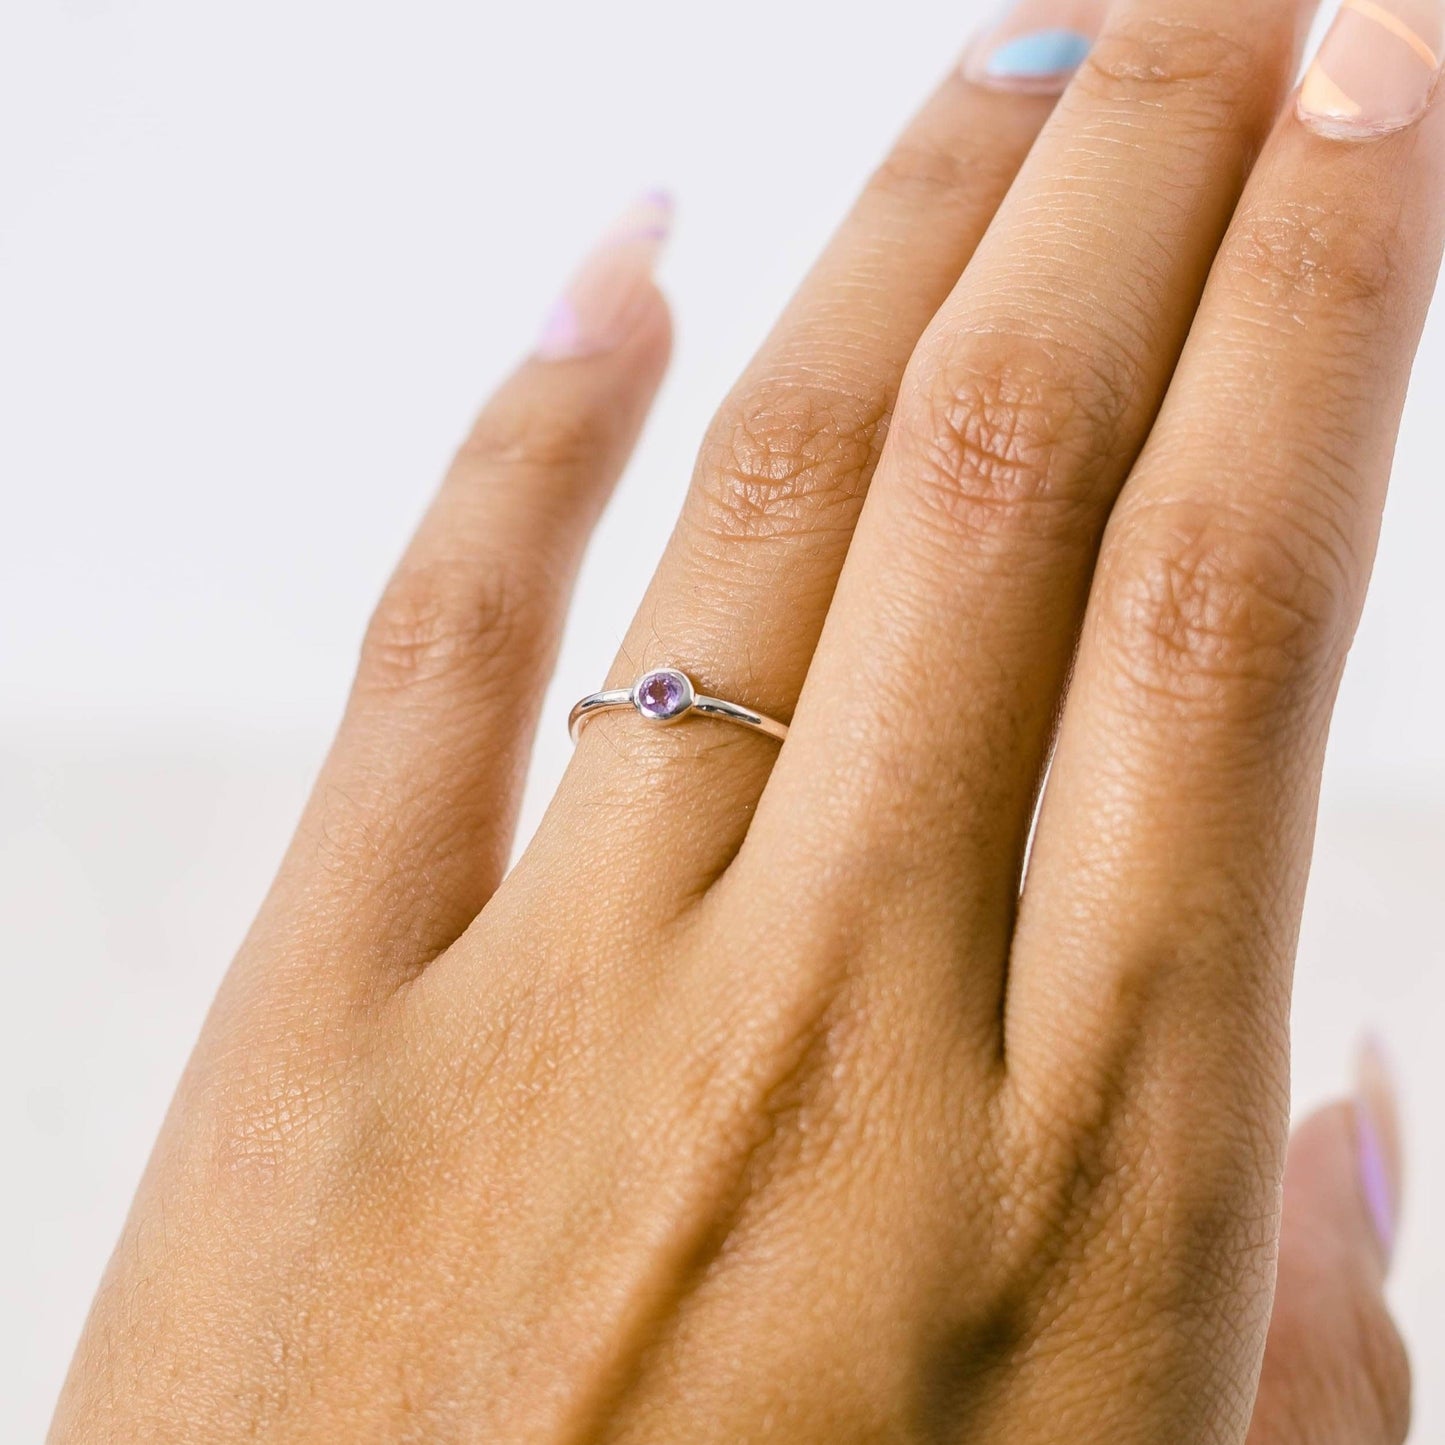 Amethyst Silver or Gold Ring by Tiny Rituals